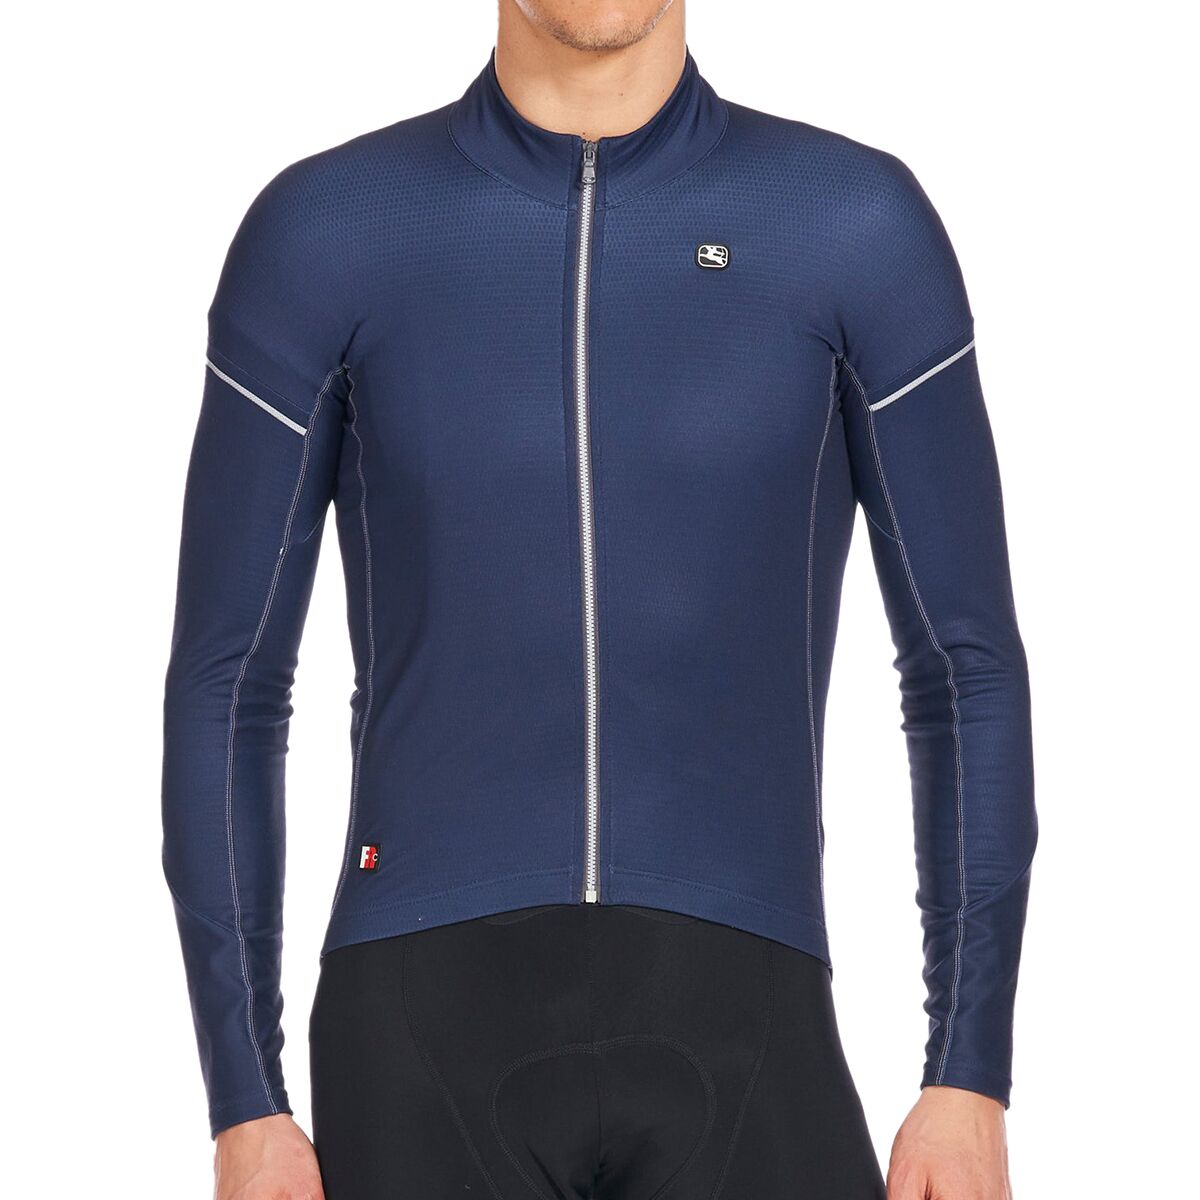 FR-C Pro Thermal Long-Sleeve Jersey - Men's - In The Know Cycling